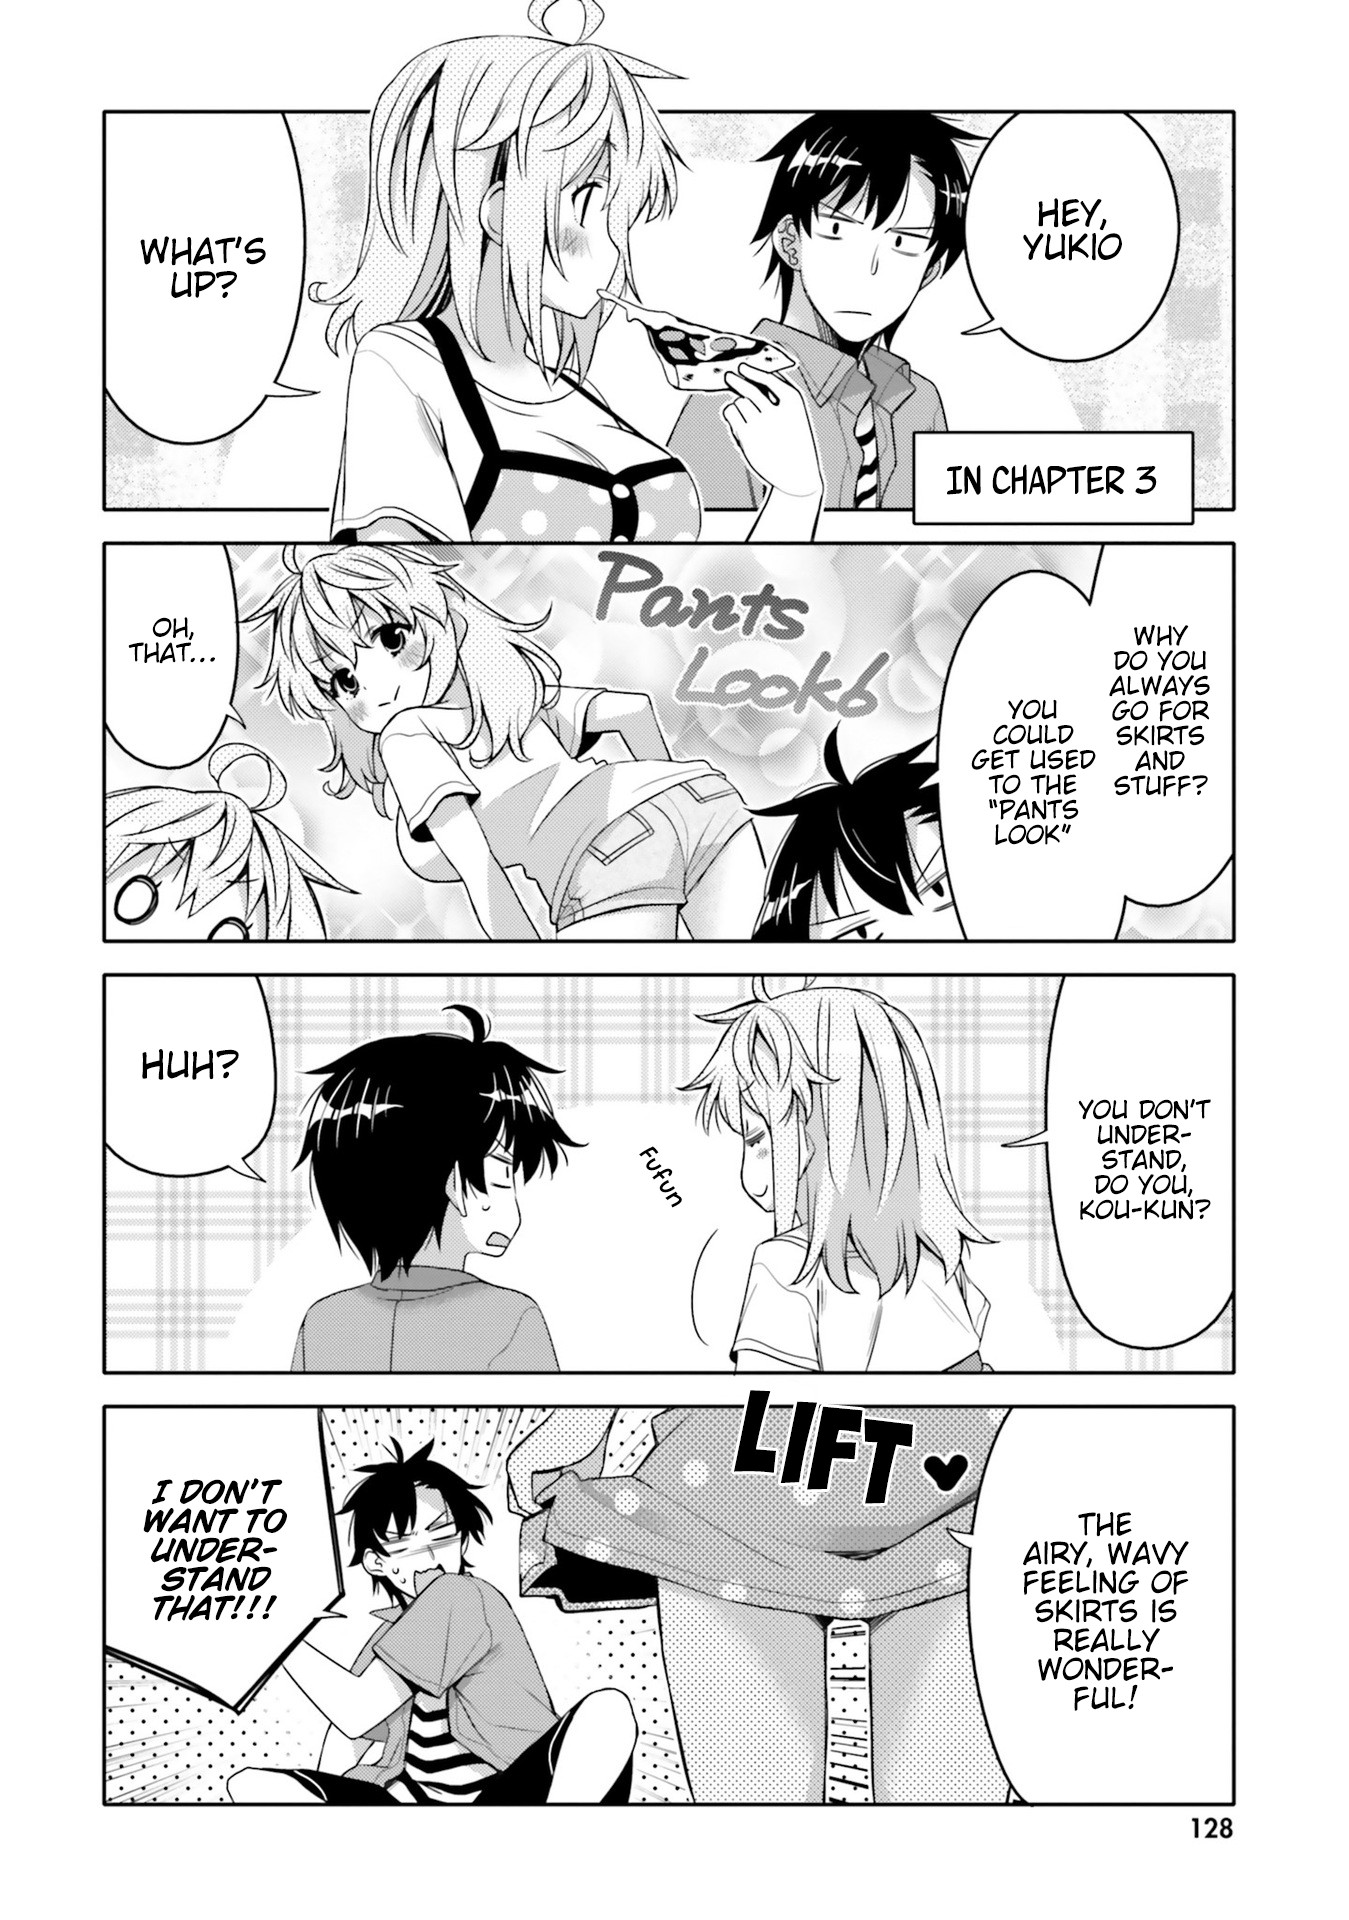 I Am Worried That My Childhood Friend Is Too Cute! - Page 4